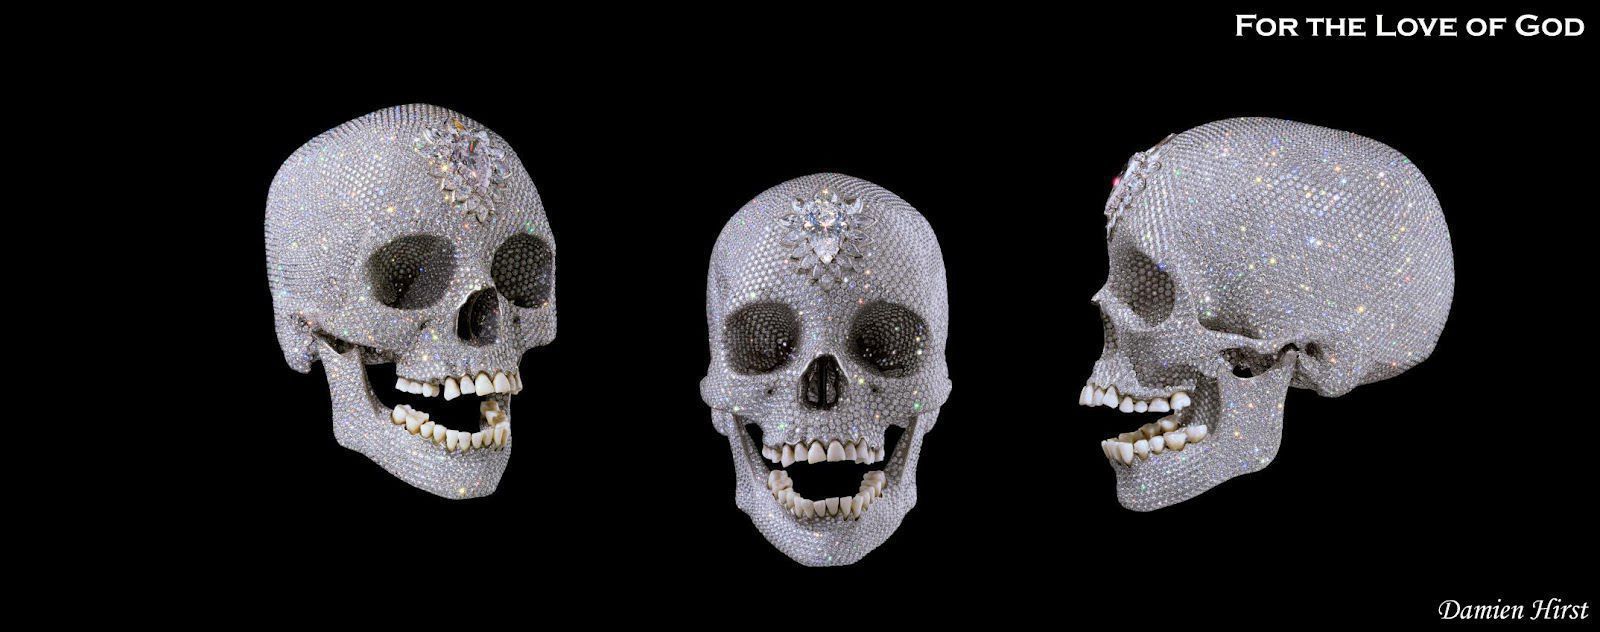 Hirst - For the Love of God